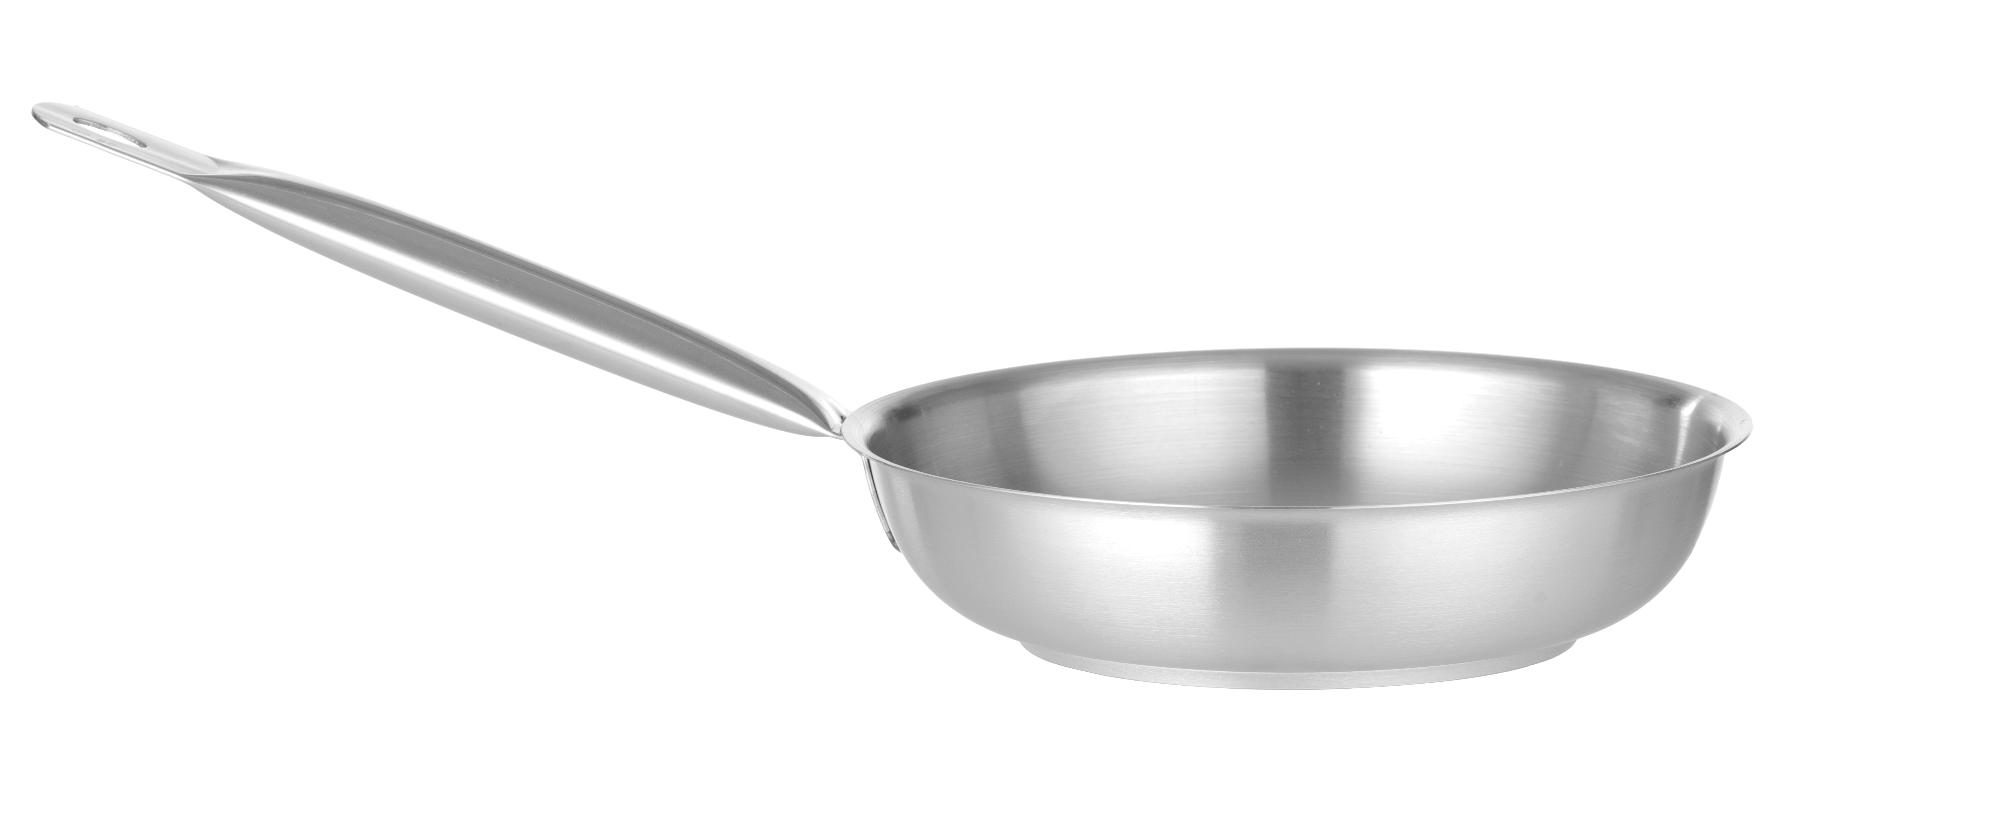 Stainless steel frying pan, 200mm